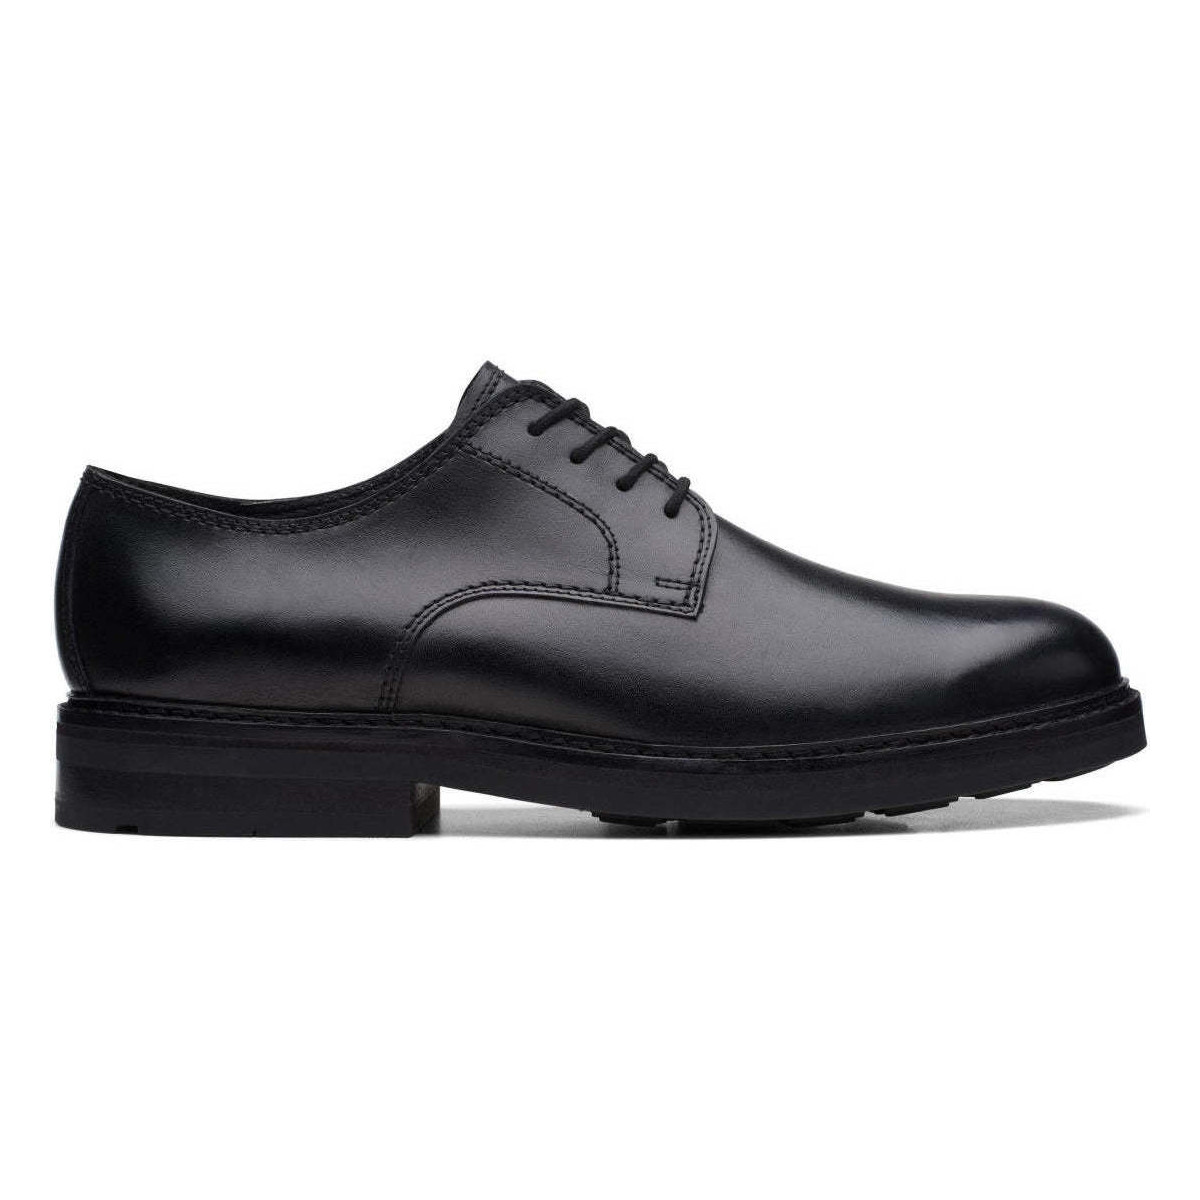 Chaussures Homme Baskets basses Clarks craftevan lace formal Noir